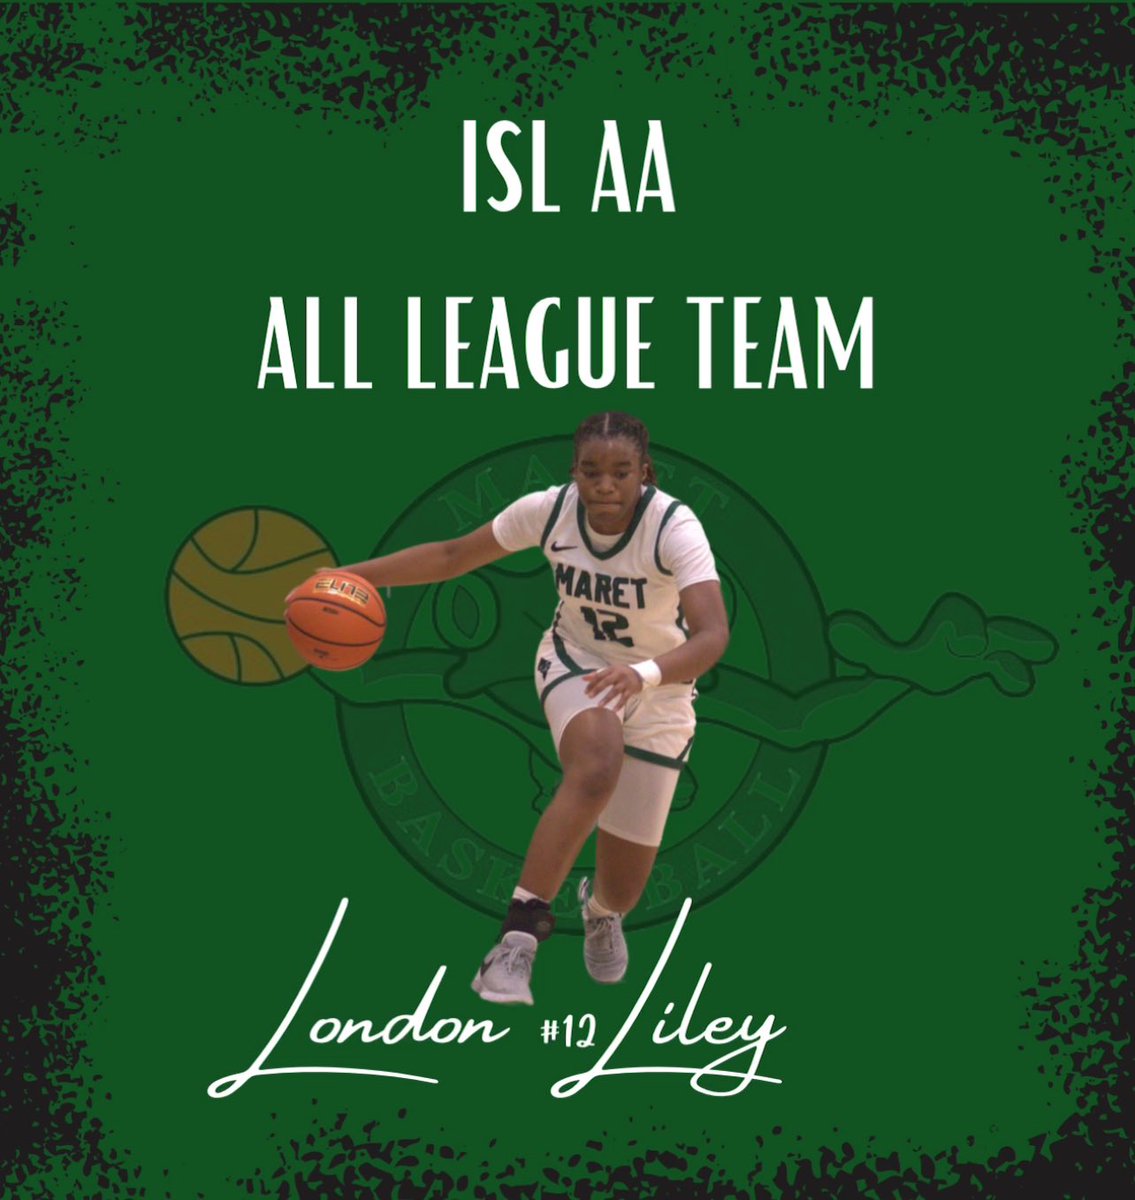 We are so proud of you! @LileyLondon